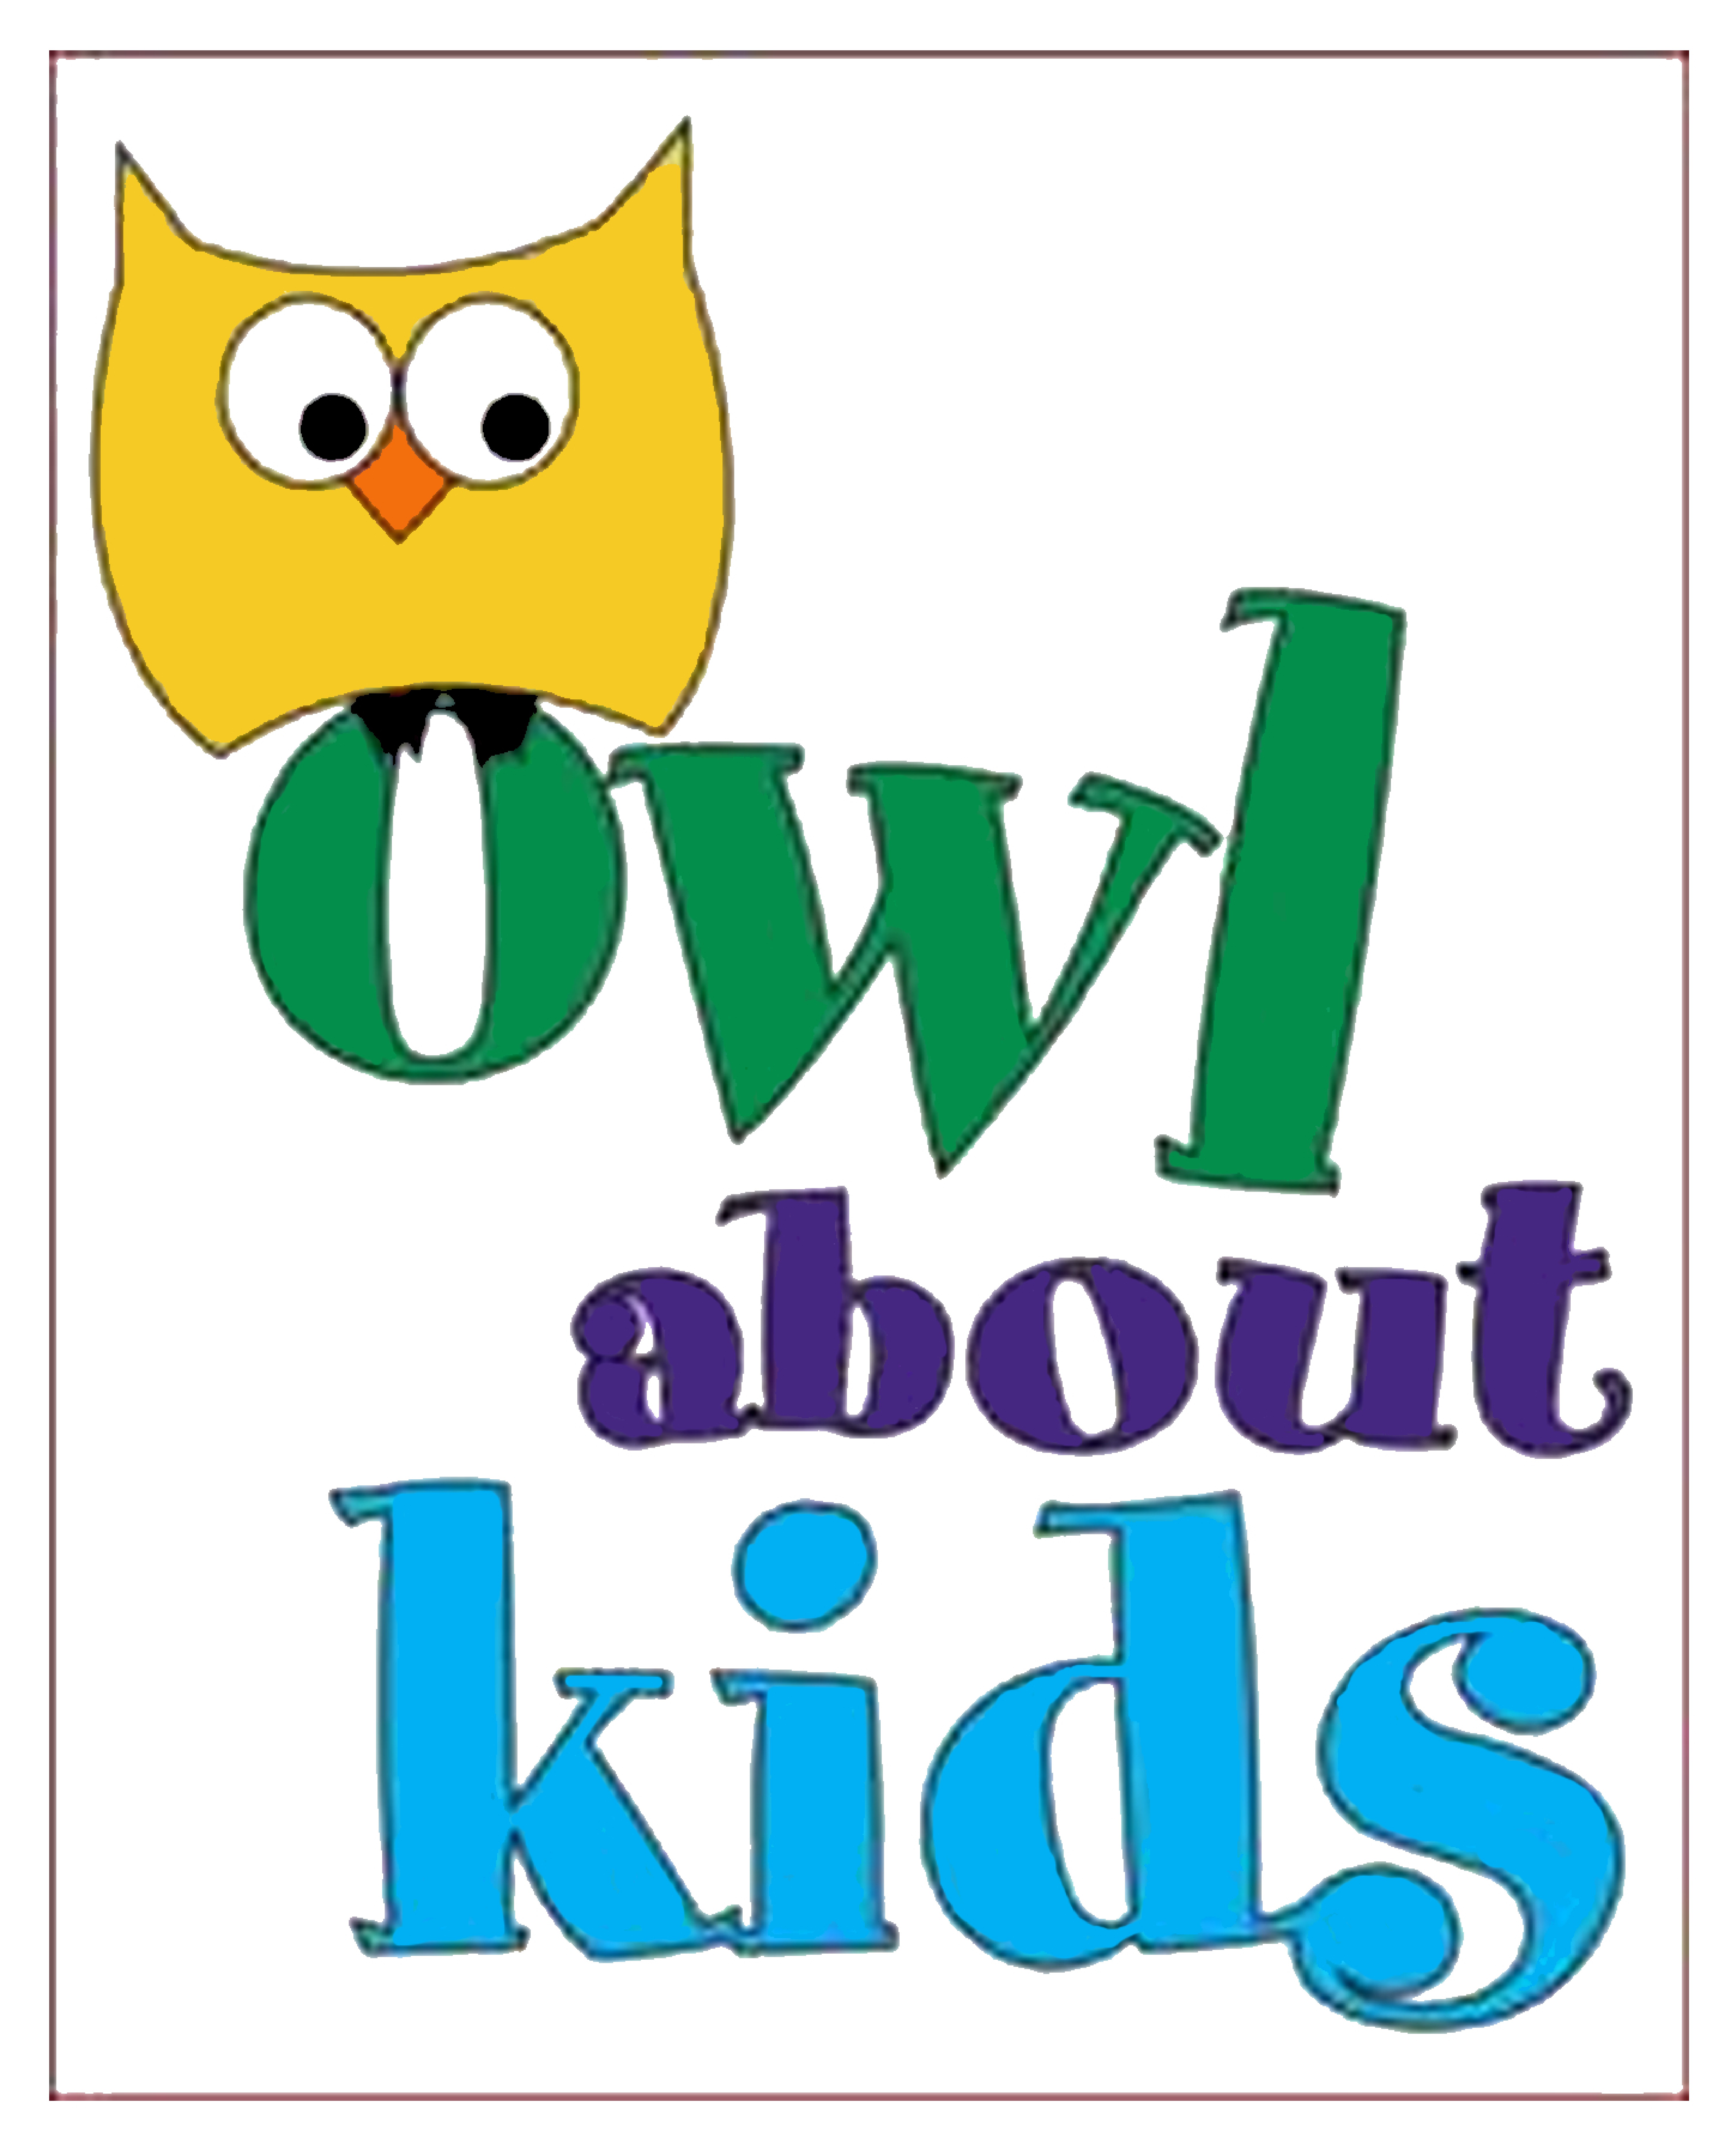 Owl About Kids Savannah children's gifts, clothing 